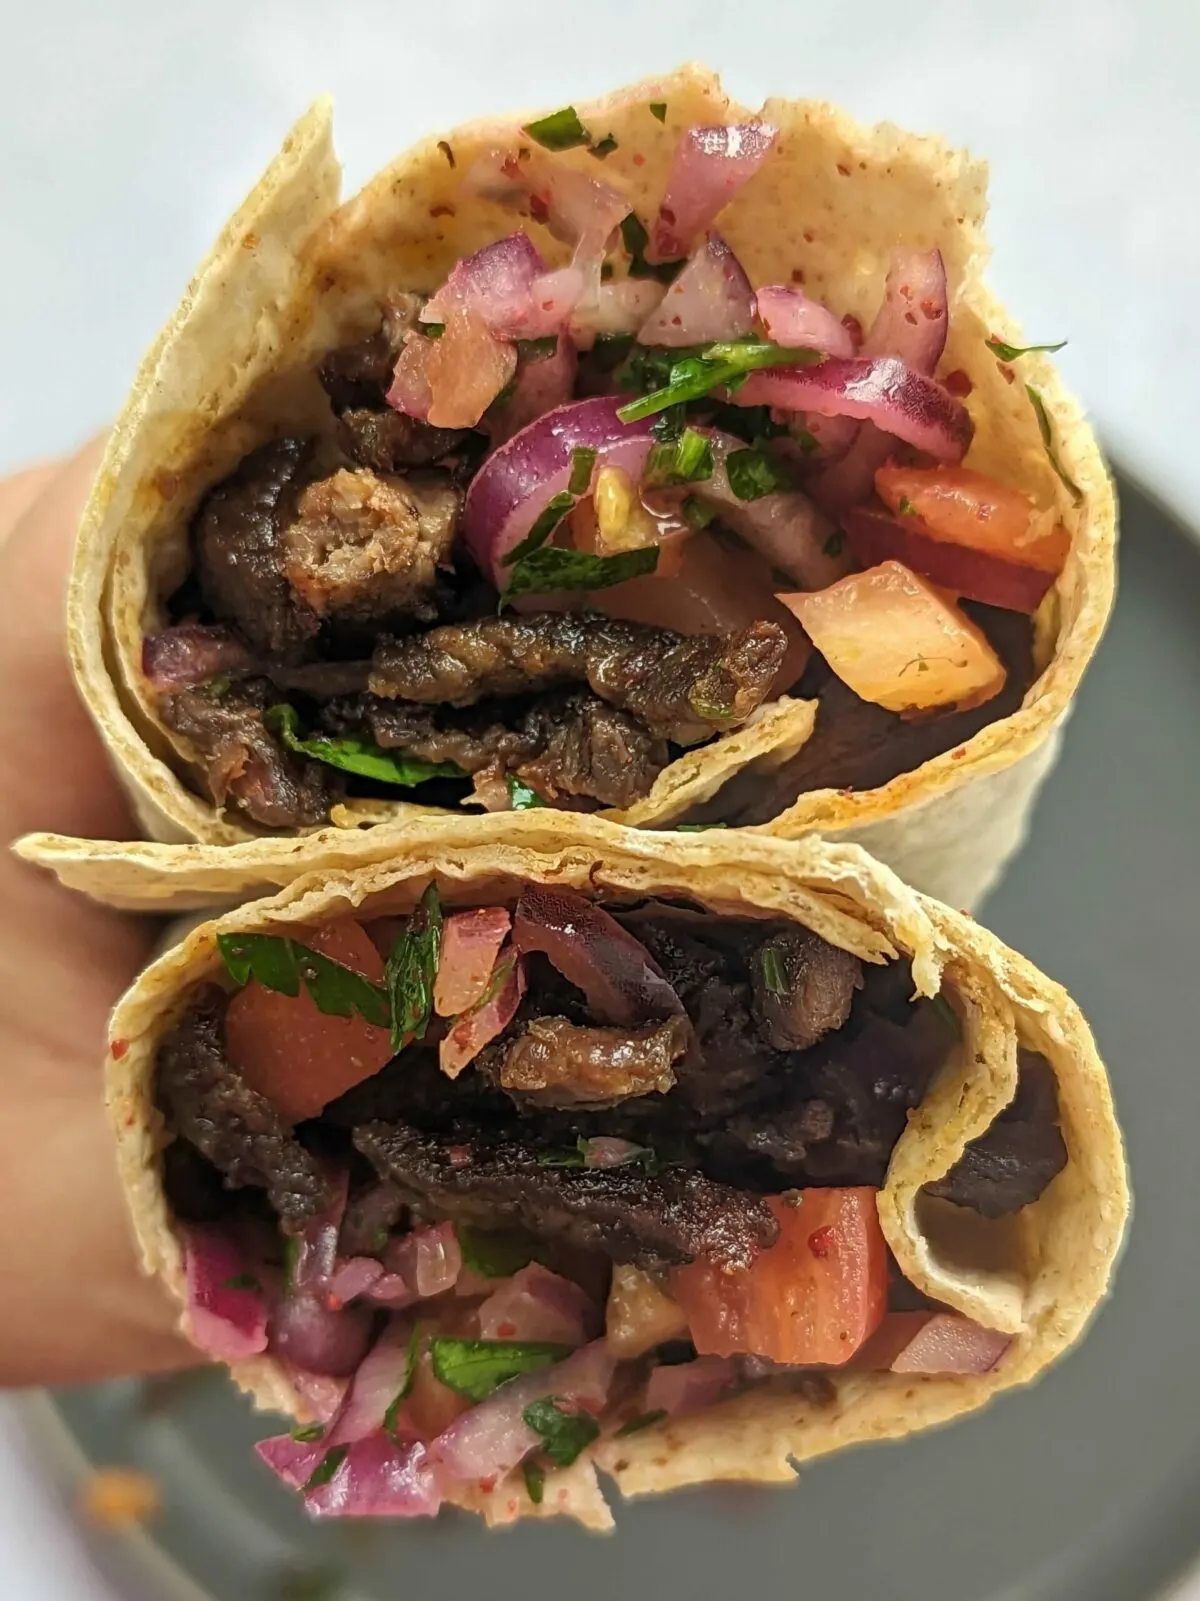 Over the top view of the cut-section of a tantuni wrap.